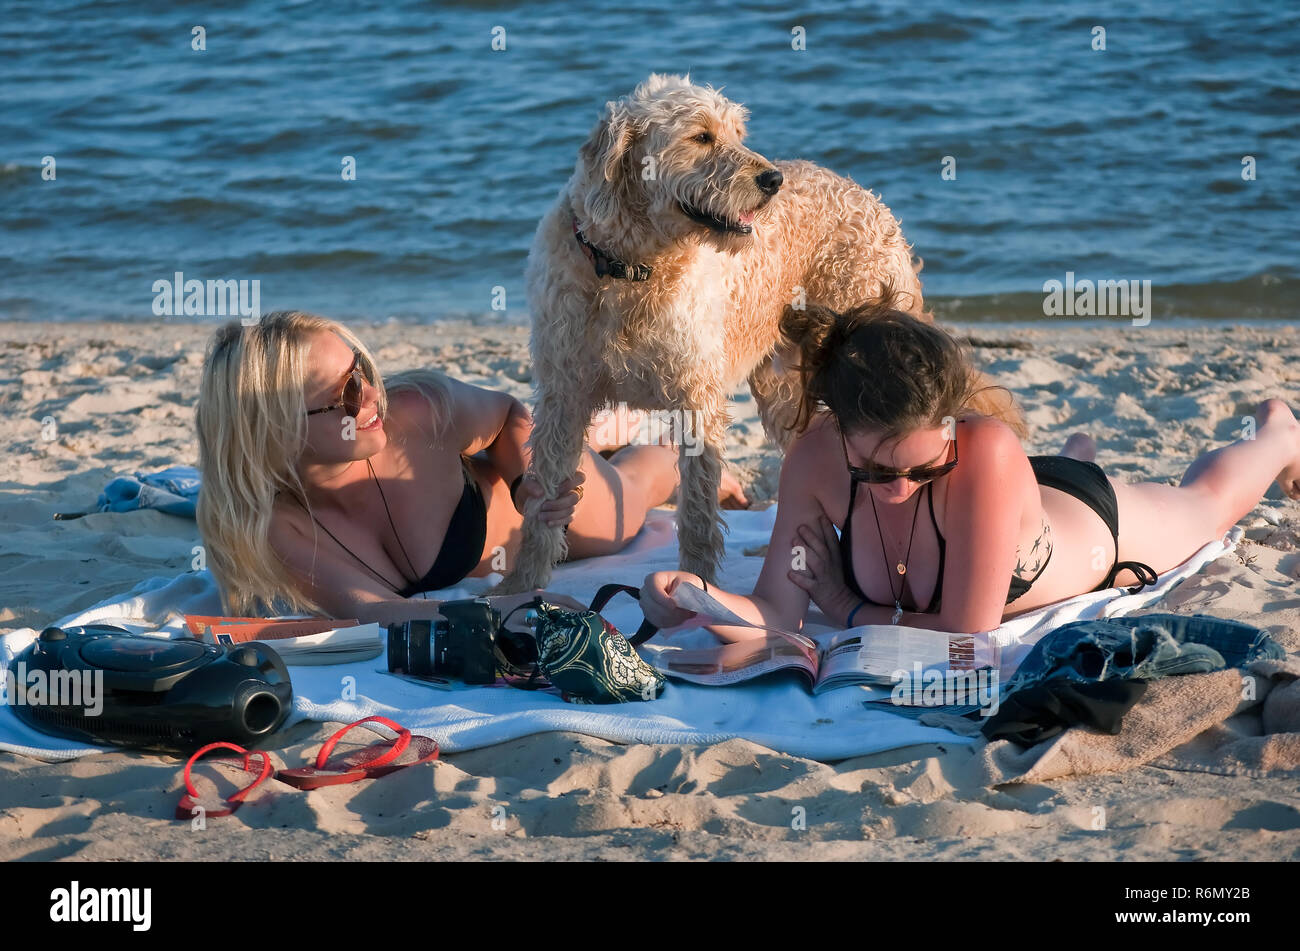 Women sunbathe with their dog, May 8, 2011 on Front Beach in Ocean Springs, Mississippi. Stock Photo